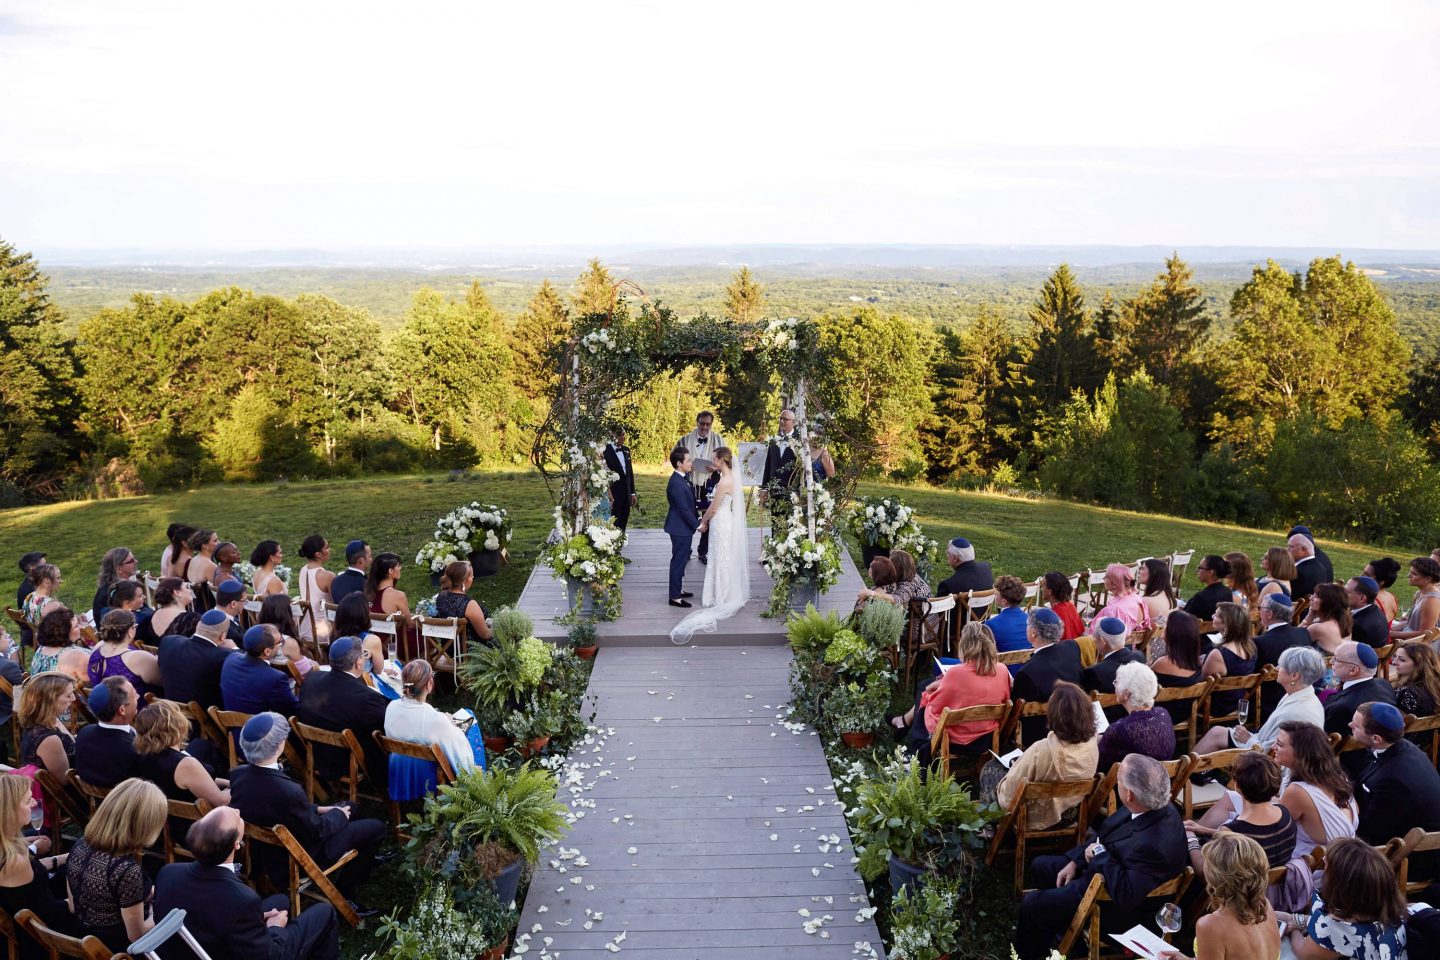 Ceremony at this camp-themed wedding weekend at Cedar Lakes Estate in Upstate NY, USA | Photo by Christian Oth Studios